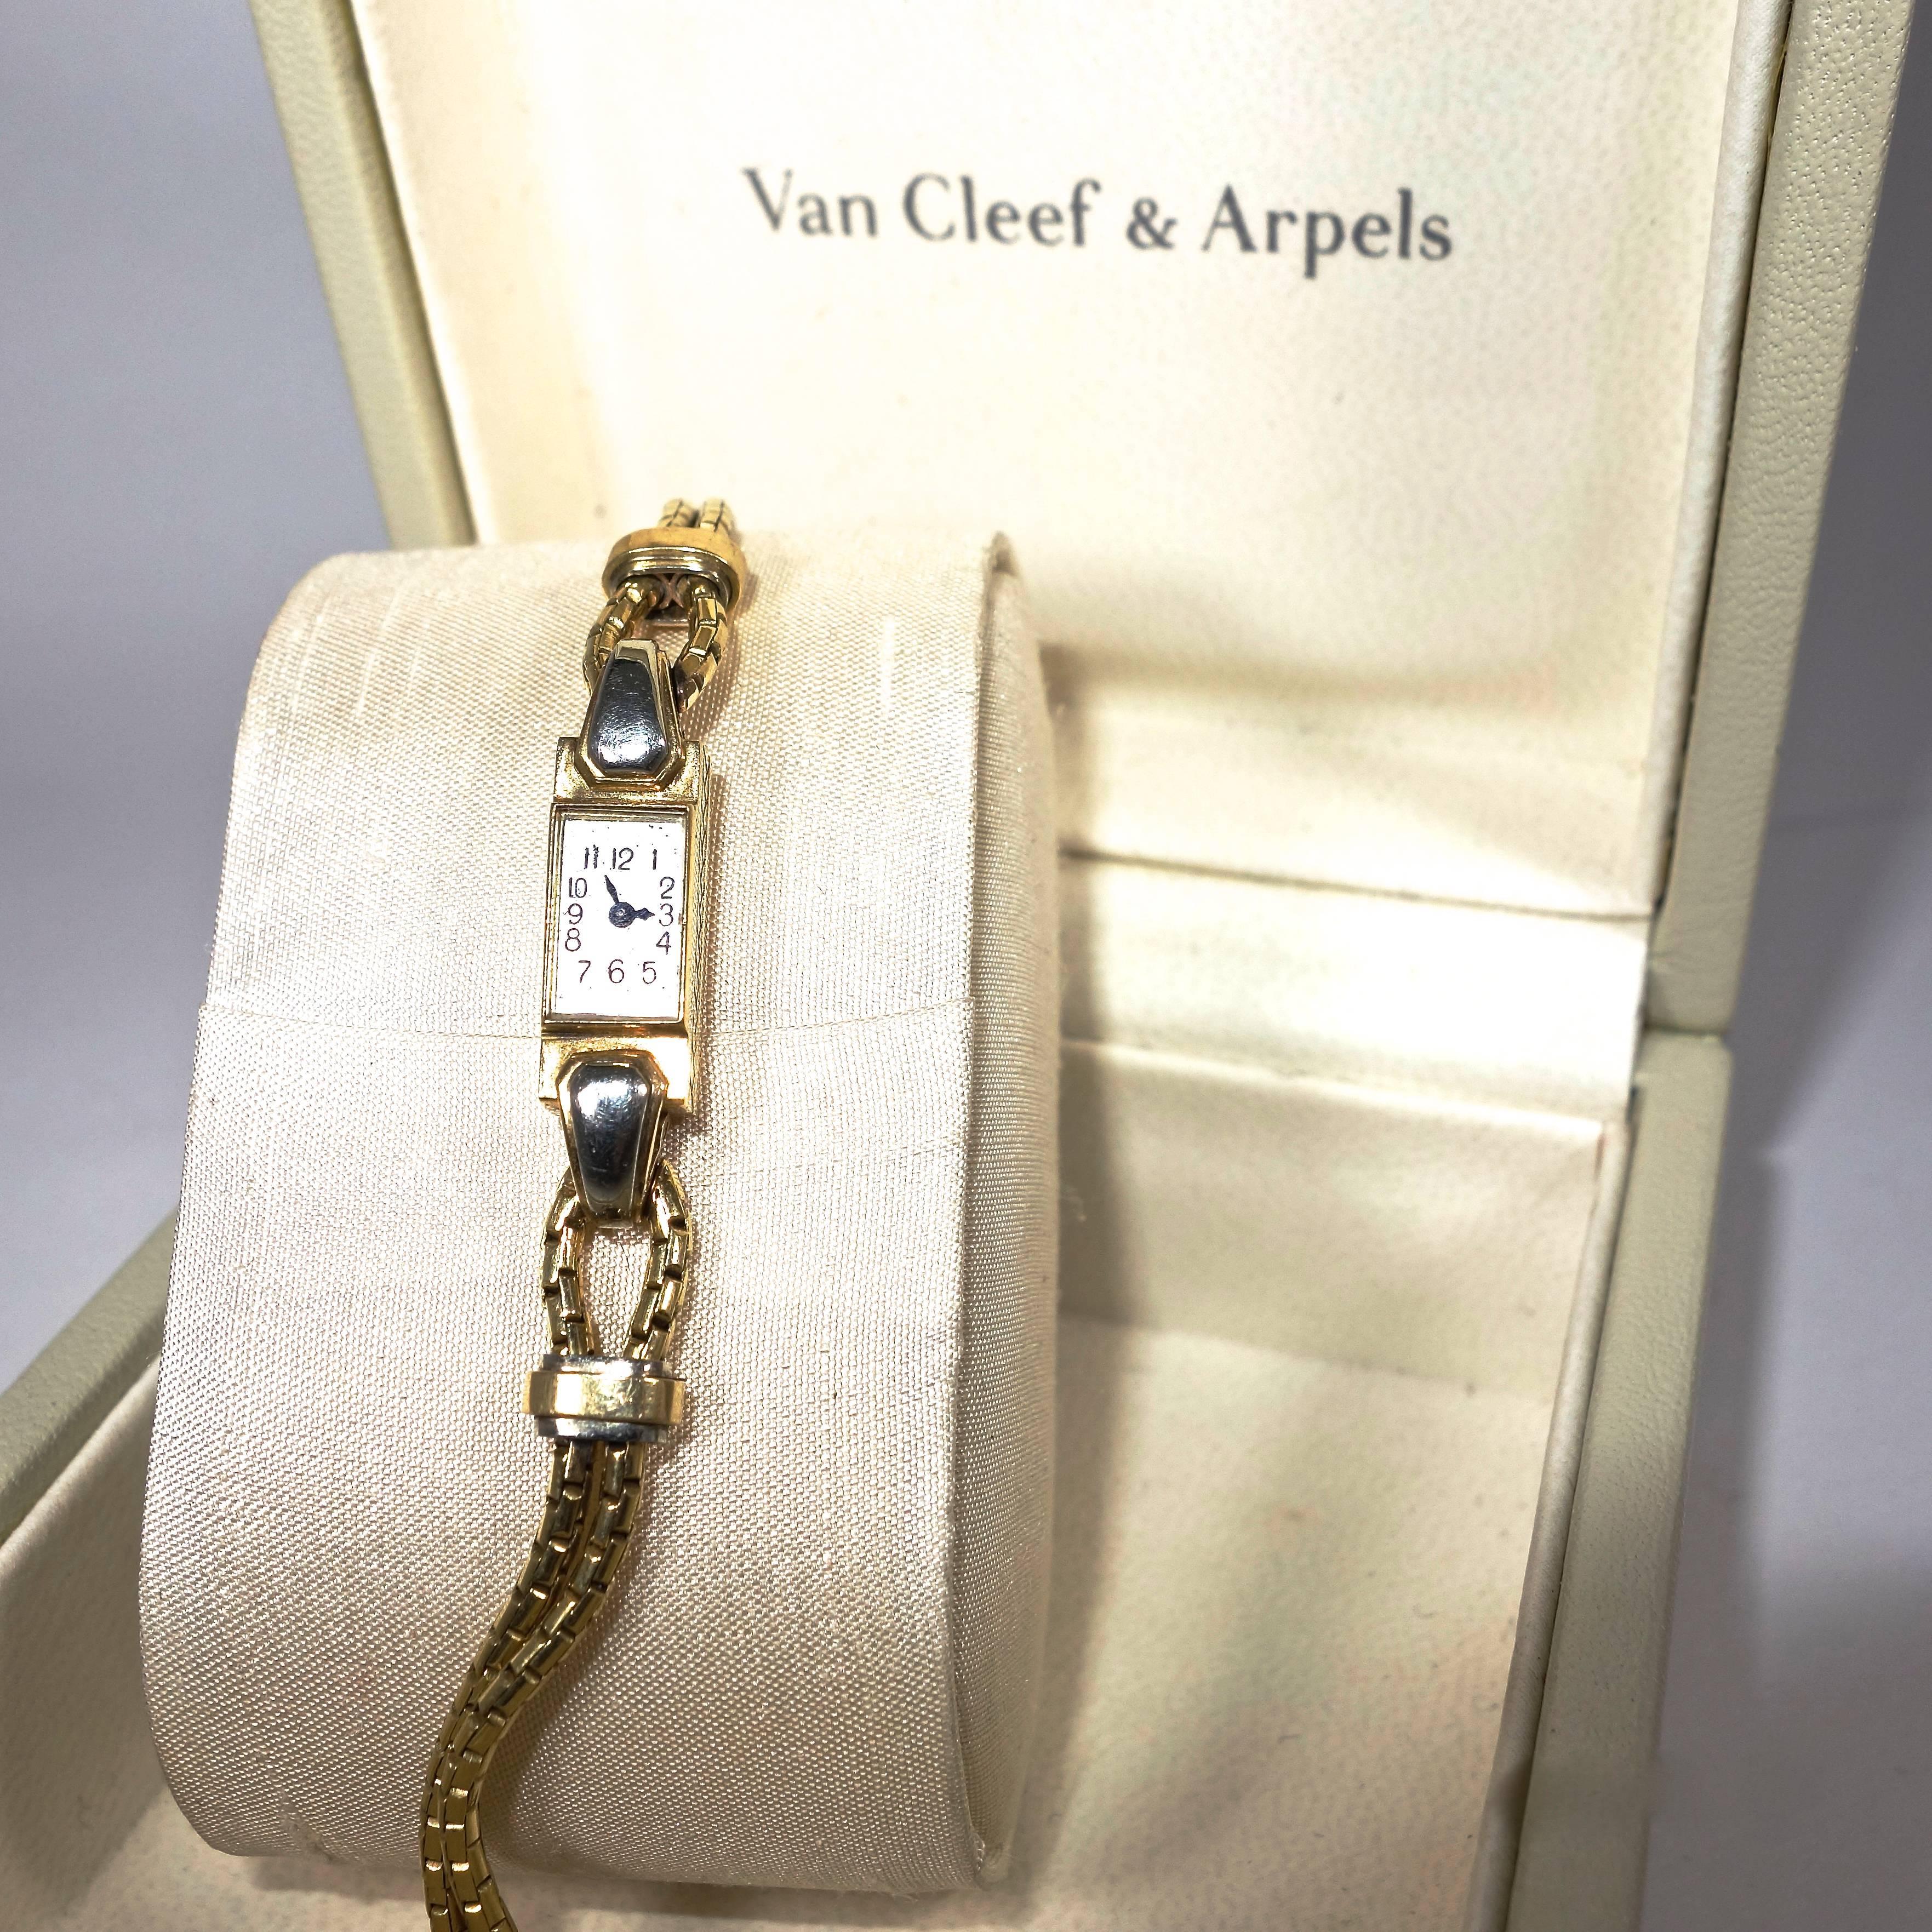 Contemporary Van Cleef & Arpels Lady's Yellow Gold Baguette Shaped Wristwatch